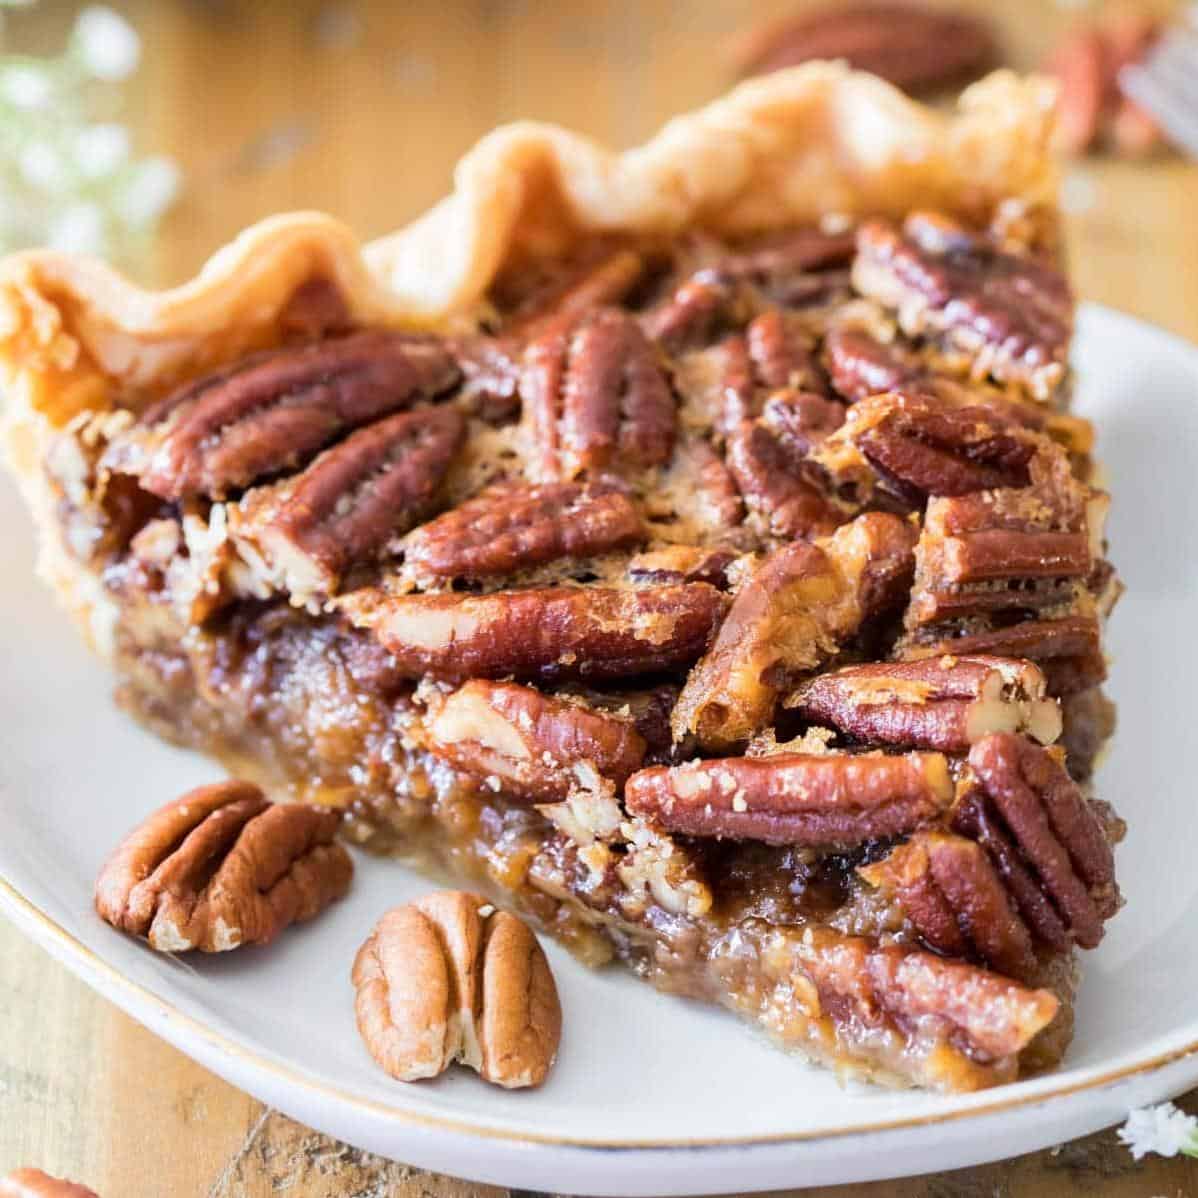  This pecan pie is easy as pie, but no one needs to know that.